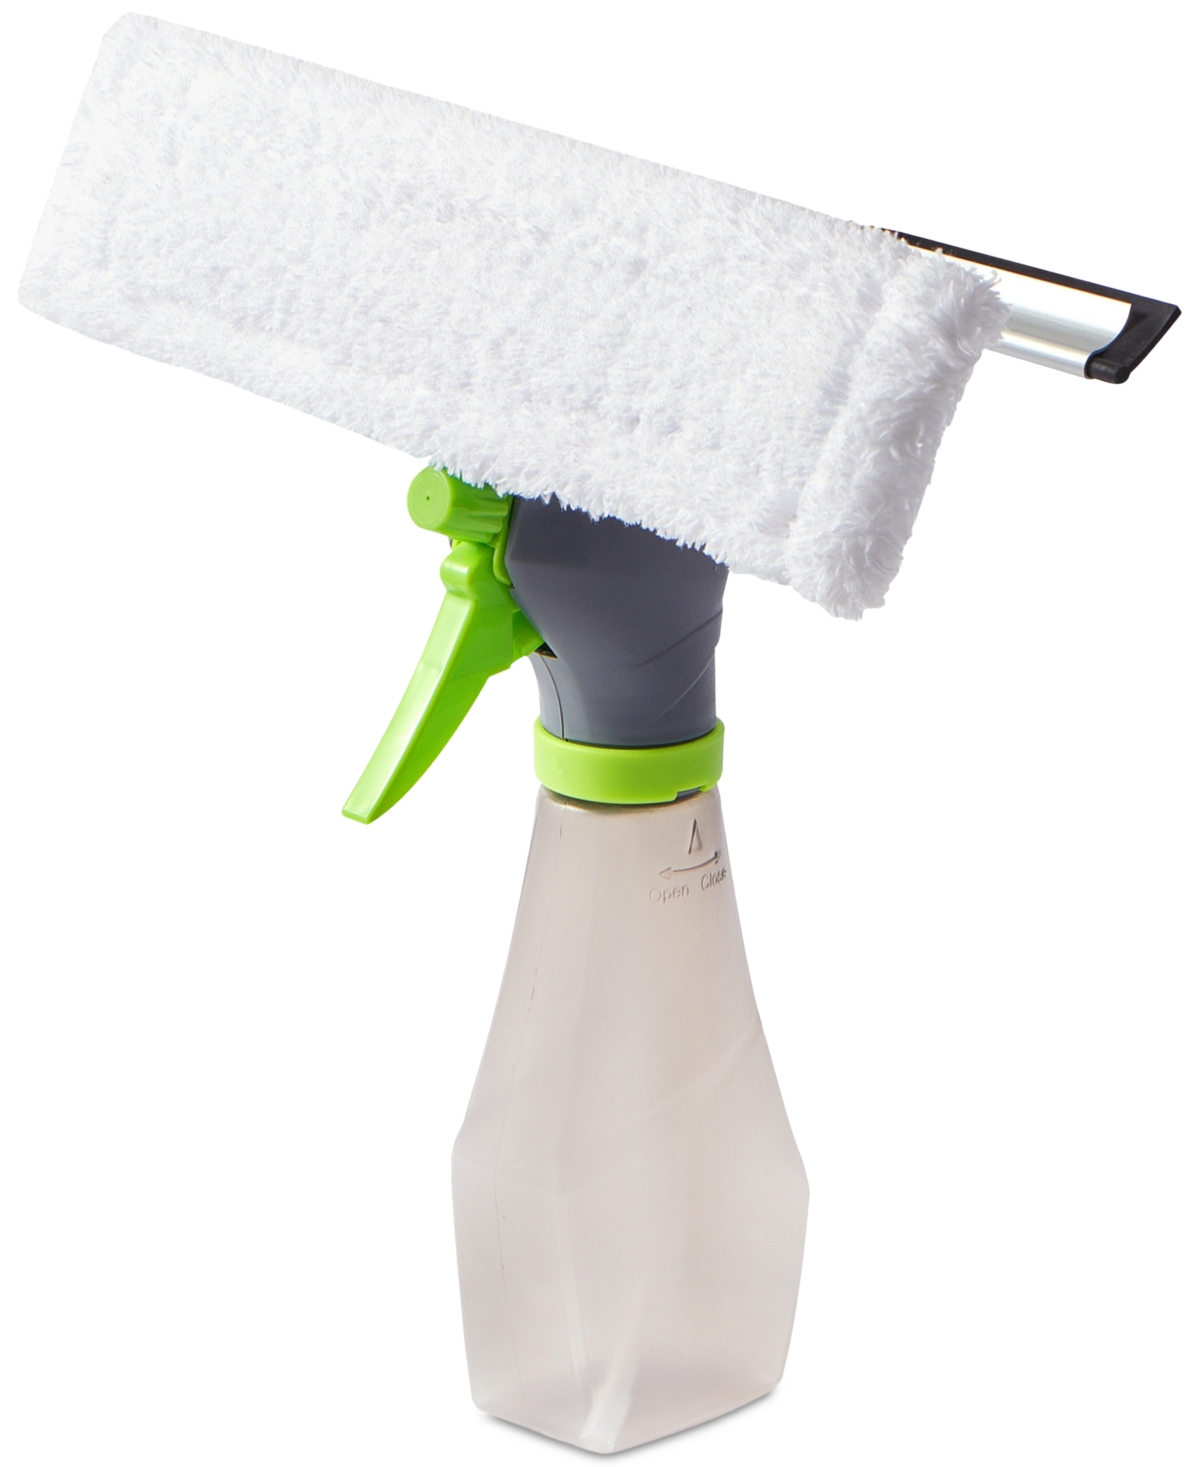 Glass Cleaner Spray Bottle with Built-in Squeegee - Lime